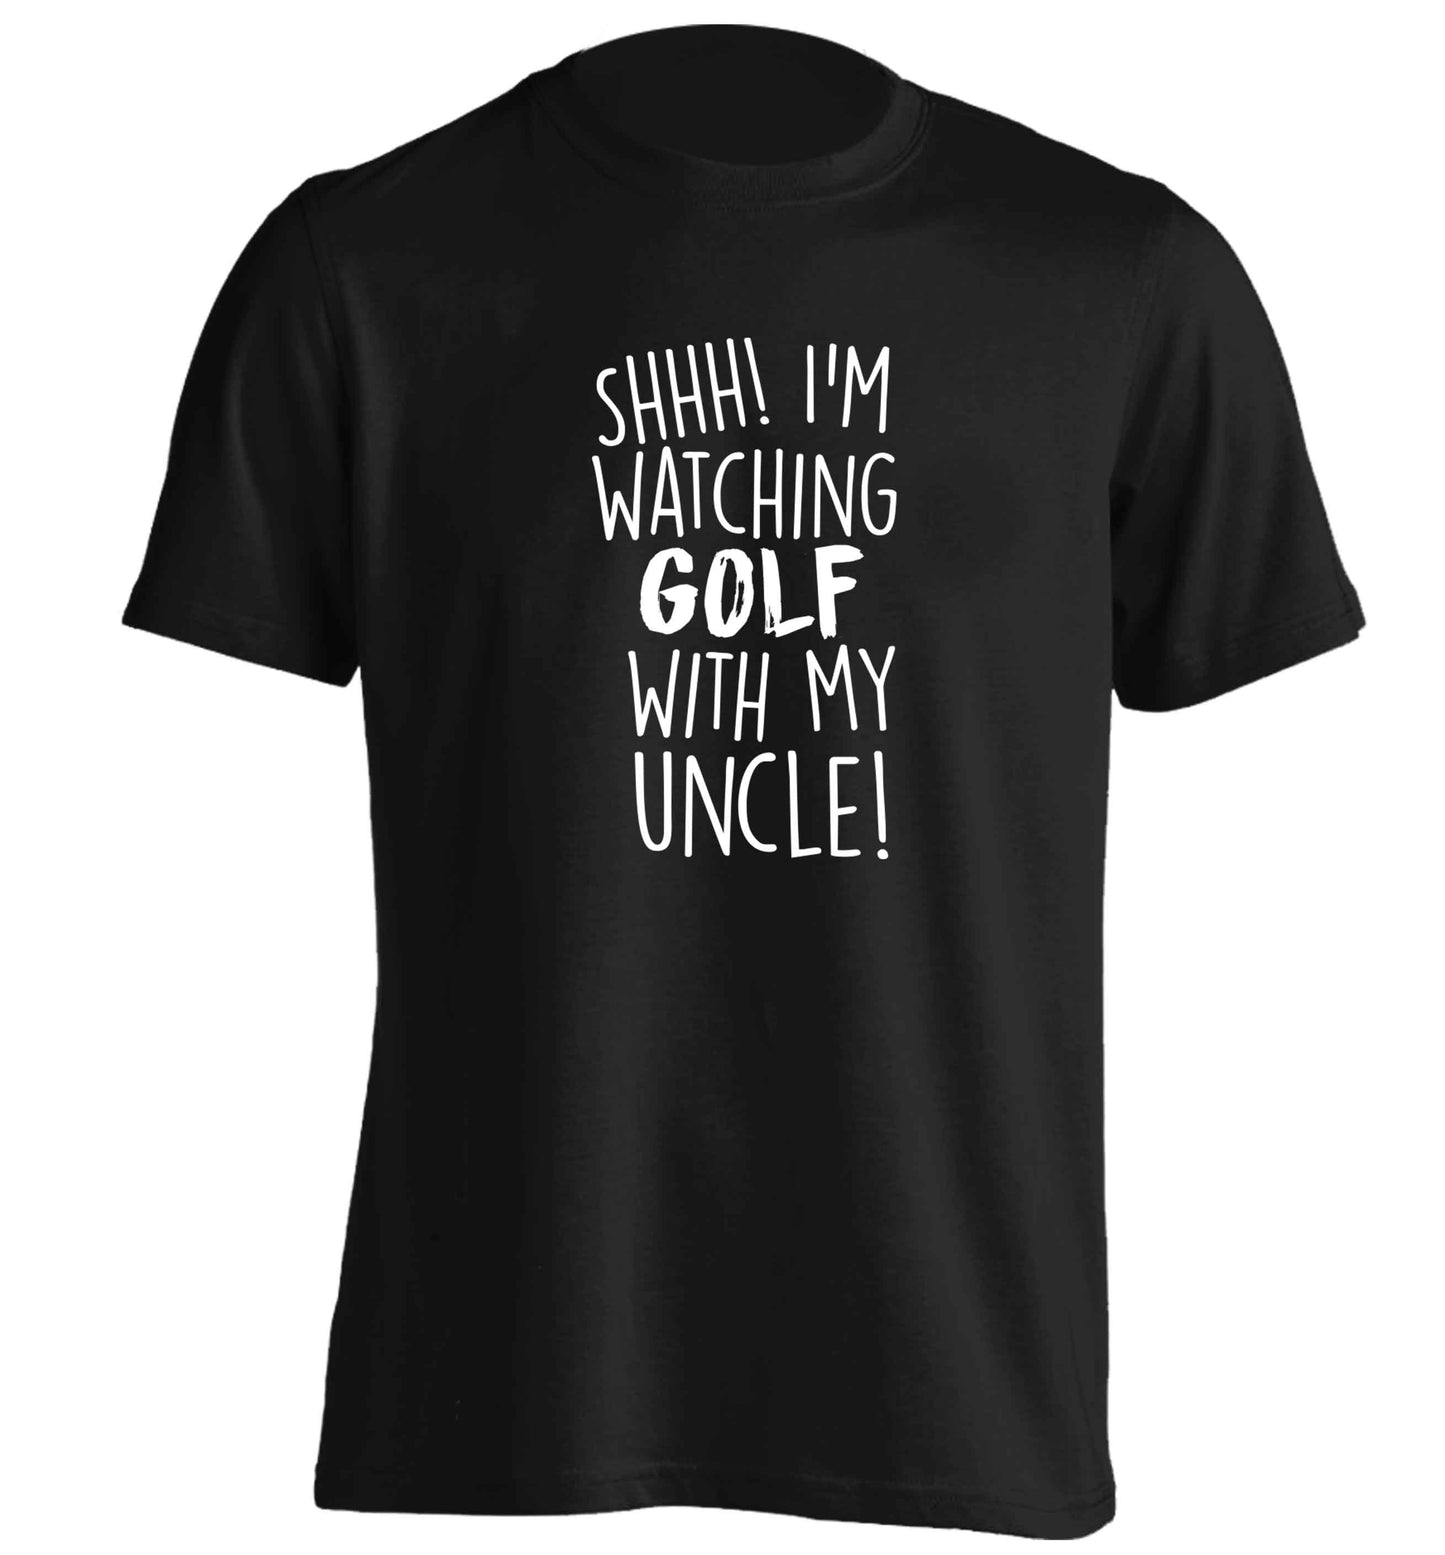 Shh I'm watching golf with my uncle adults unisex black Tshirt 2XL